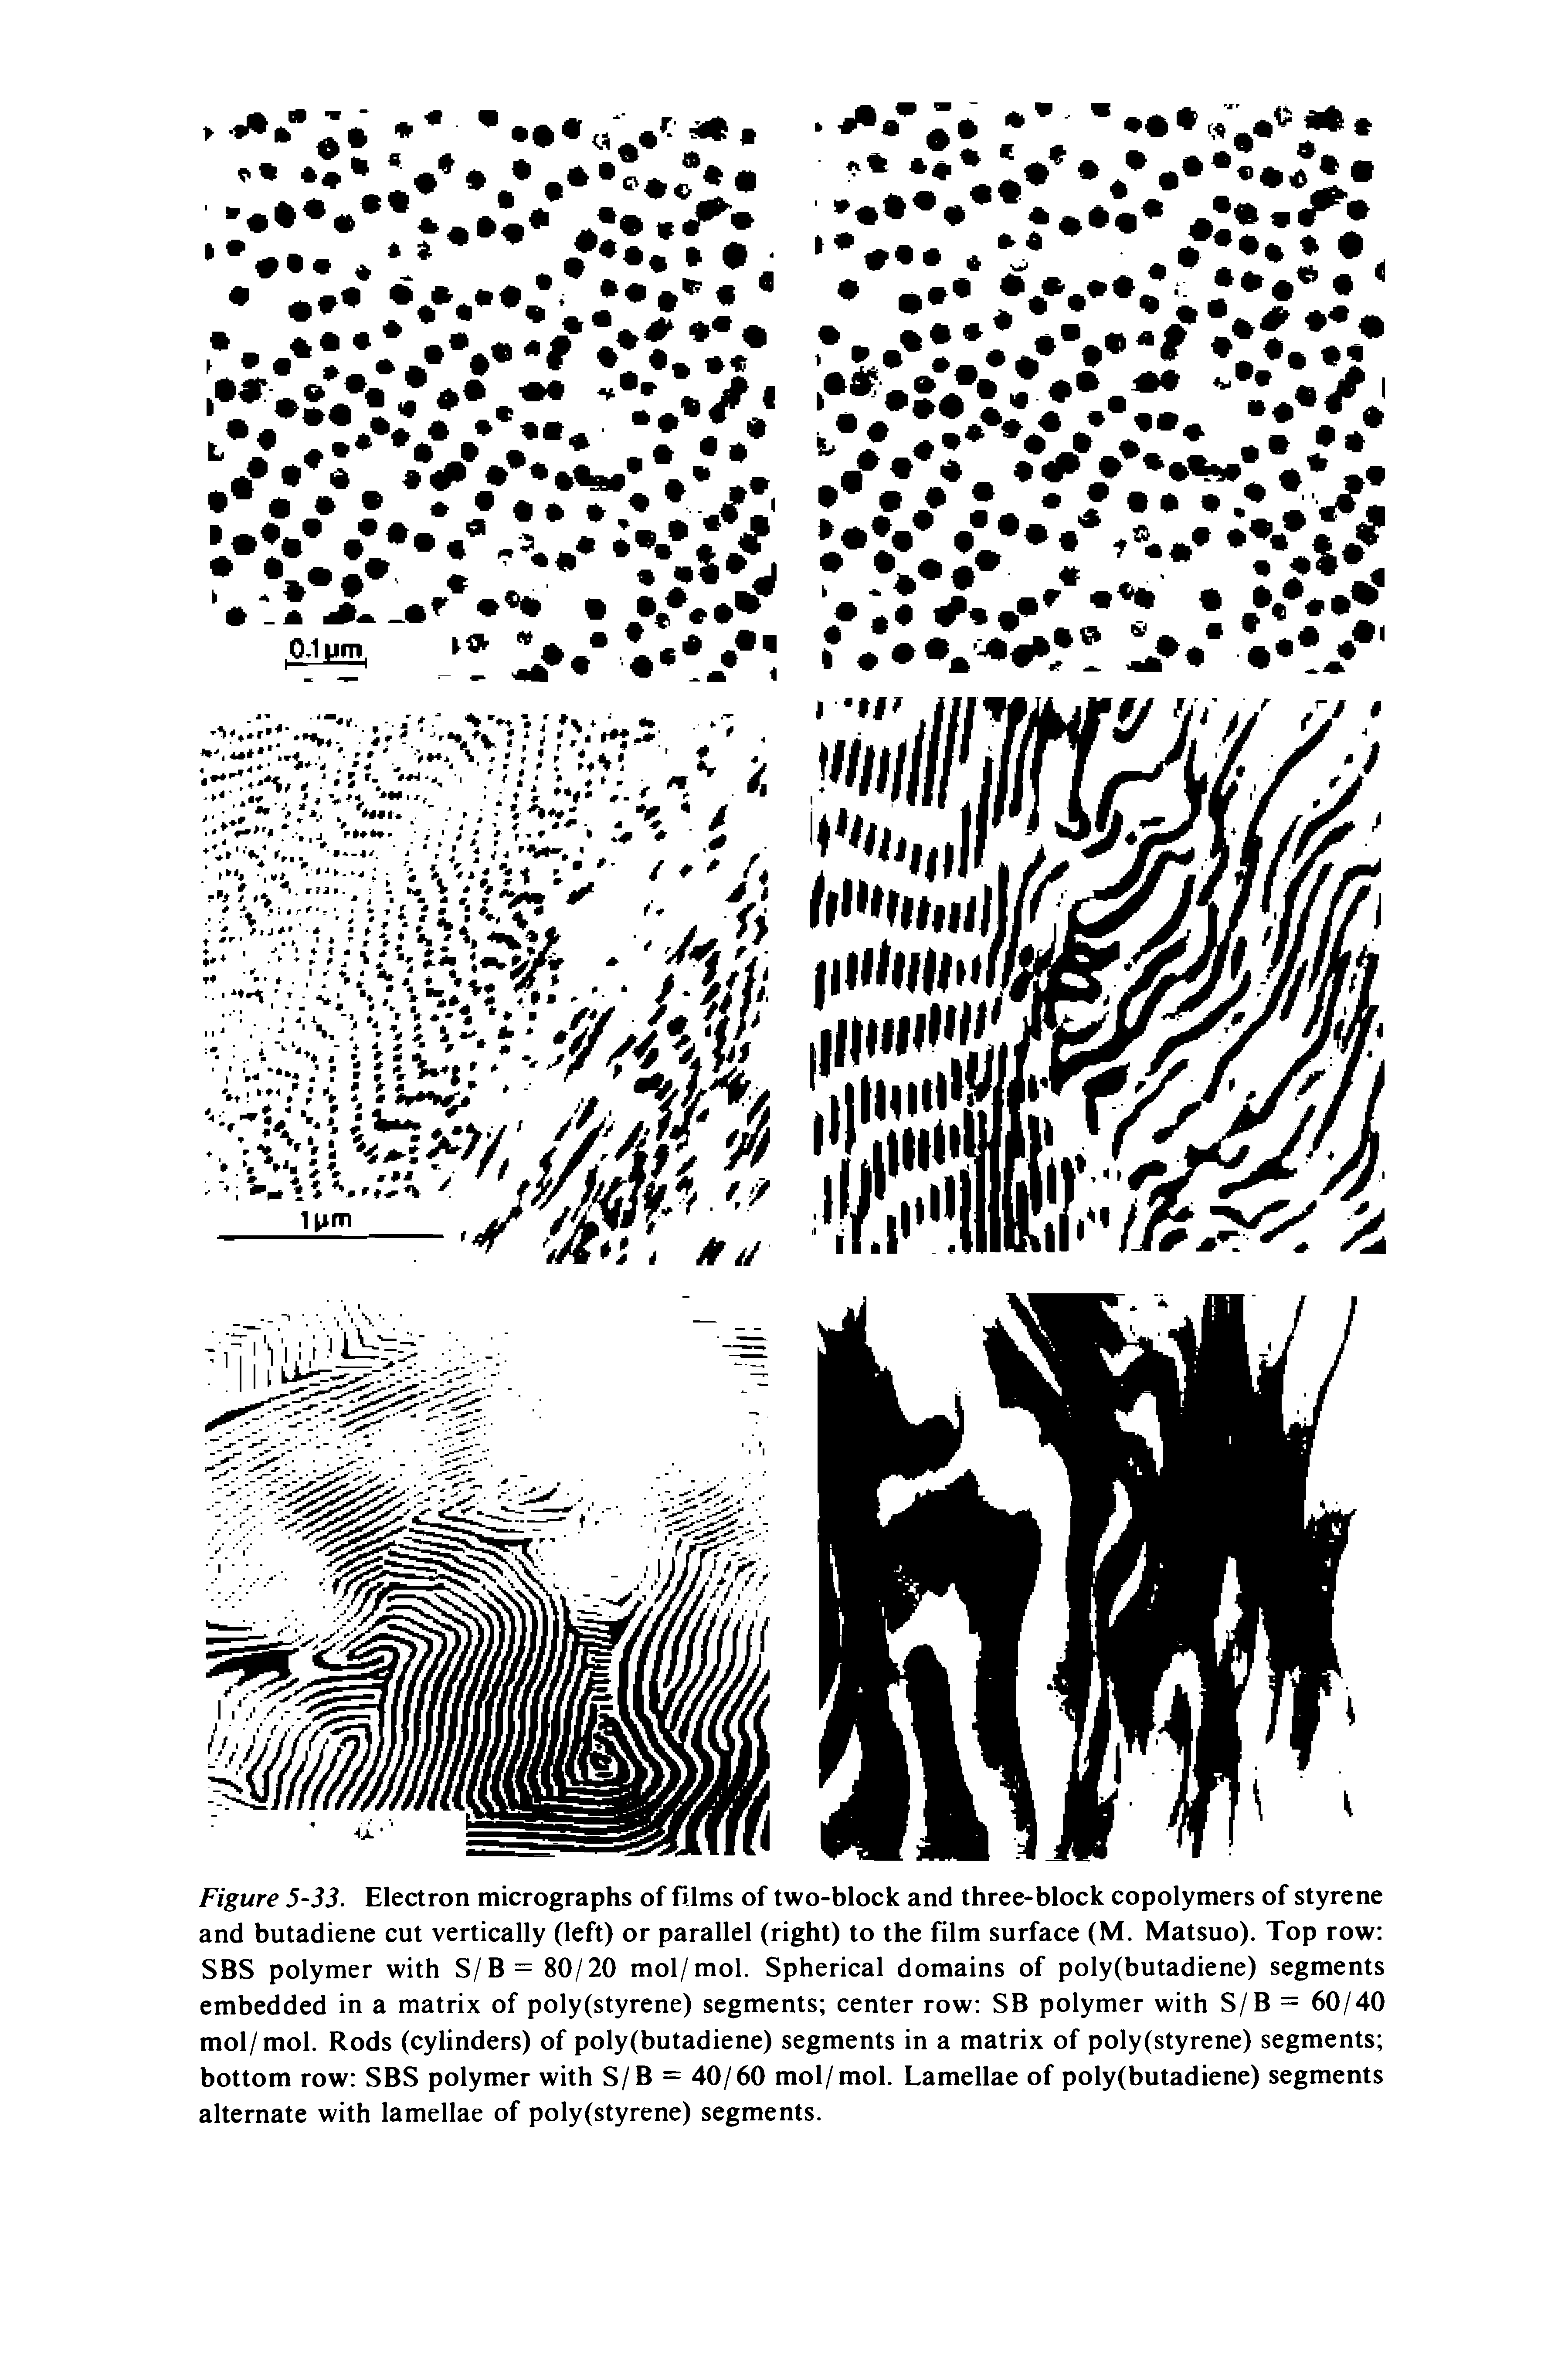 Figure 5-33. Electron micrographs of films of two-block and three-block copolymers of styrene and butadiene cut vertically (left) or parallel (right) to the film surface (M. Matsuo). Top row SBS polymer with S/B= 80/20 mol/mol. Spherical domains of poly(butadiene) segments embedded in a matrix of poly(styrene) segments center row SB polymer with S/B = 60/40 mol/mol. Rods (cylinders) of poly (butadiene) segments in a matrix of poly (styrene) segments bottom row SBS polymer with S/B = 40/60 mol/mol. Lamellae of poly(butadiene) segments alternate with lamellae of poly(styrene) segments.